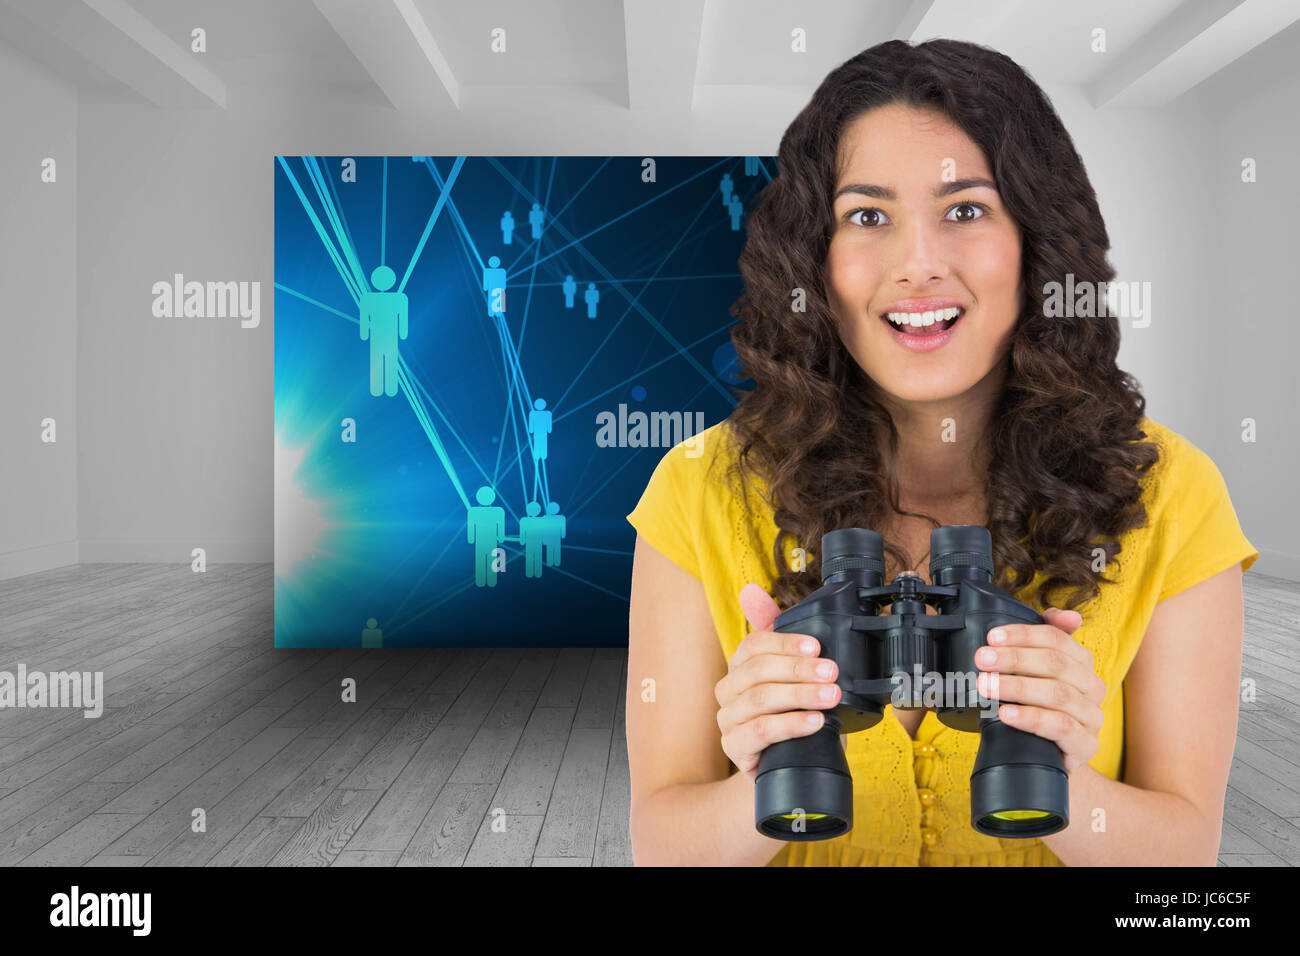 Composite image of smiling casual young woman holding binoculars Banque D'Images